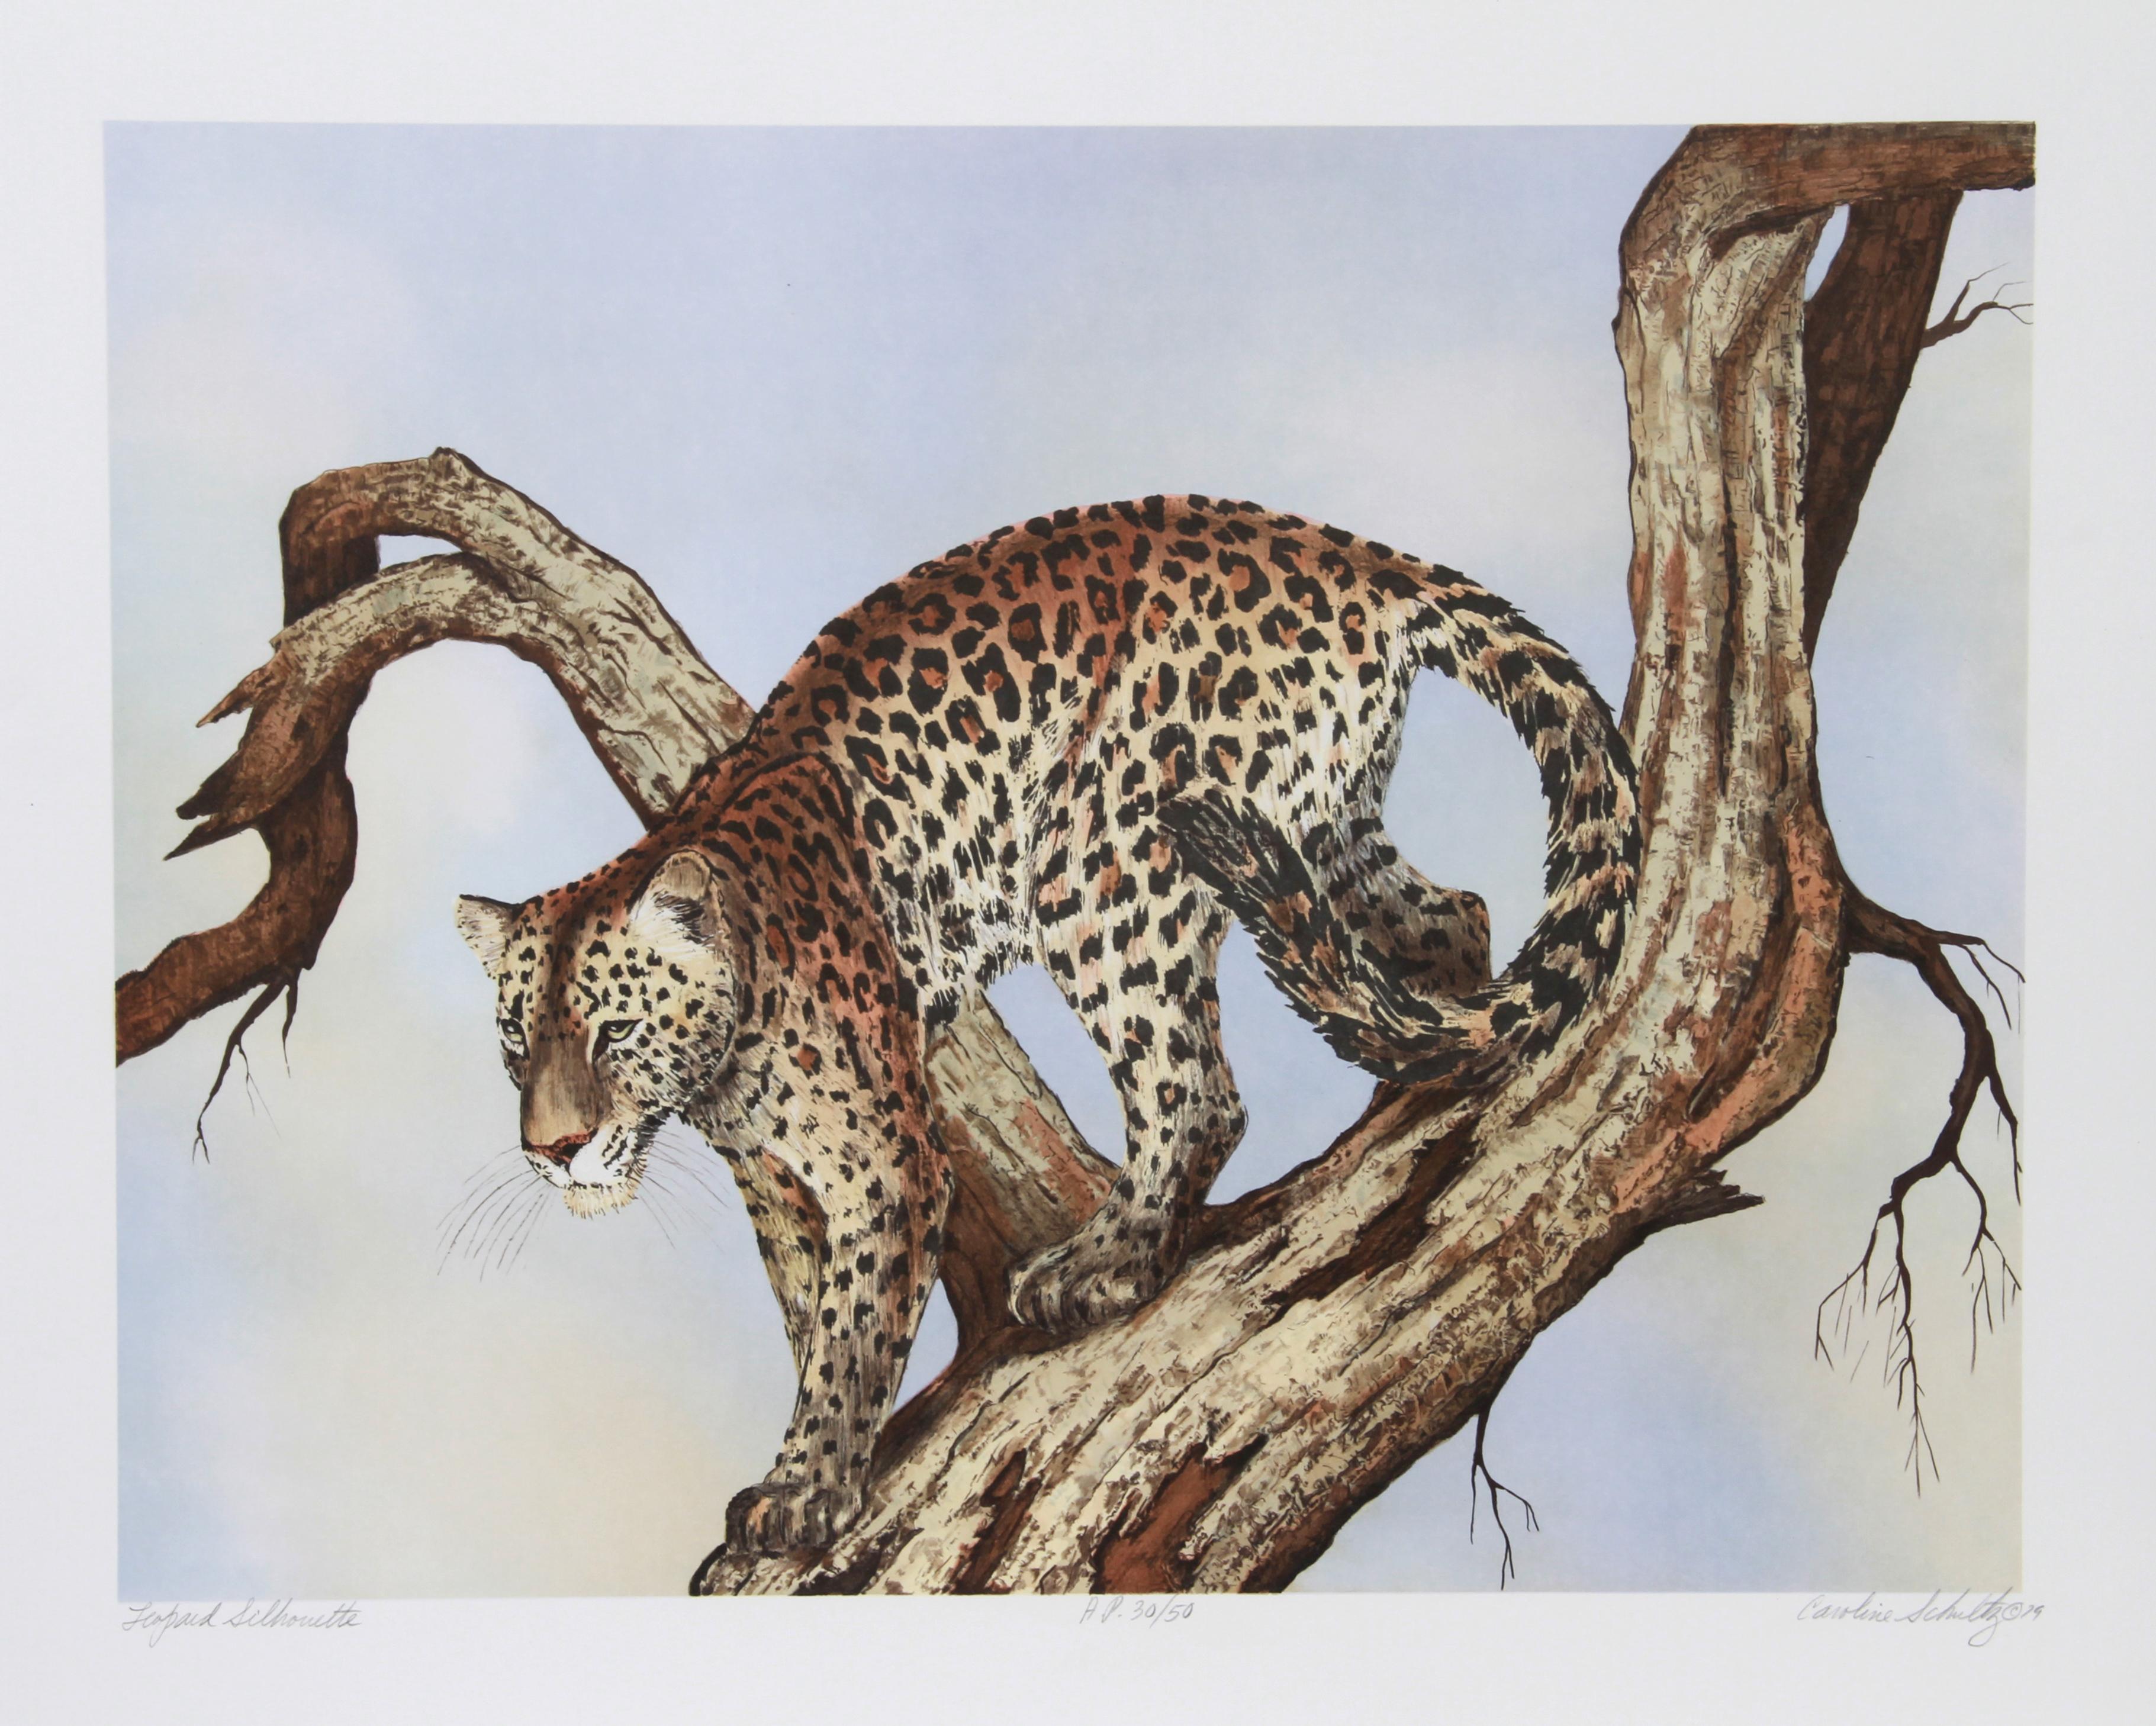 Leopard Silhouette
Caroline Schultz, American (1936–2004)
Date: 1979
Lithograph, signed and numbered in pencil
Edition of AP 50
Image Size: 18 x 24 inches
Size: 23 in. x 28 in. (58.42 cm x 71.12 cm)